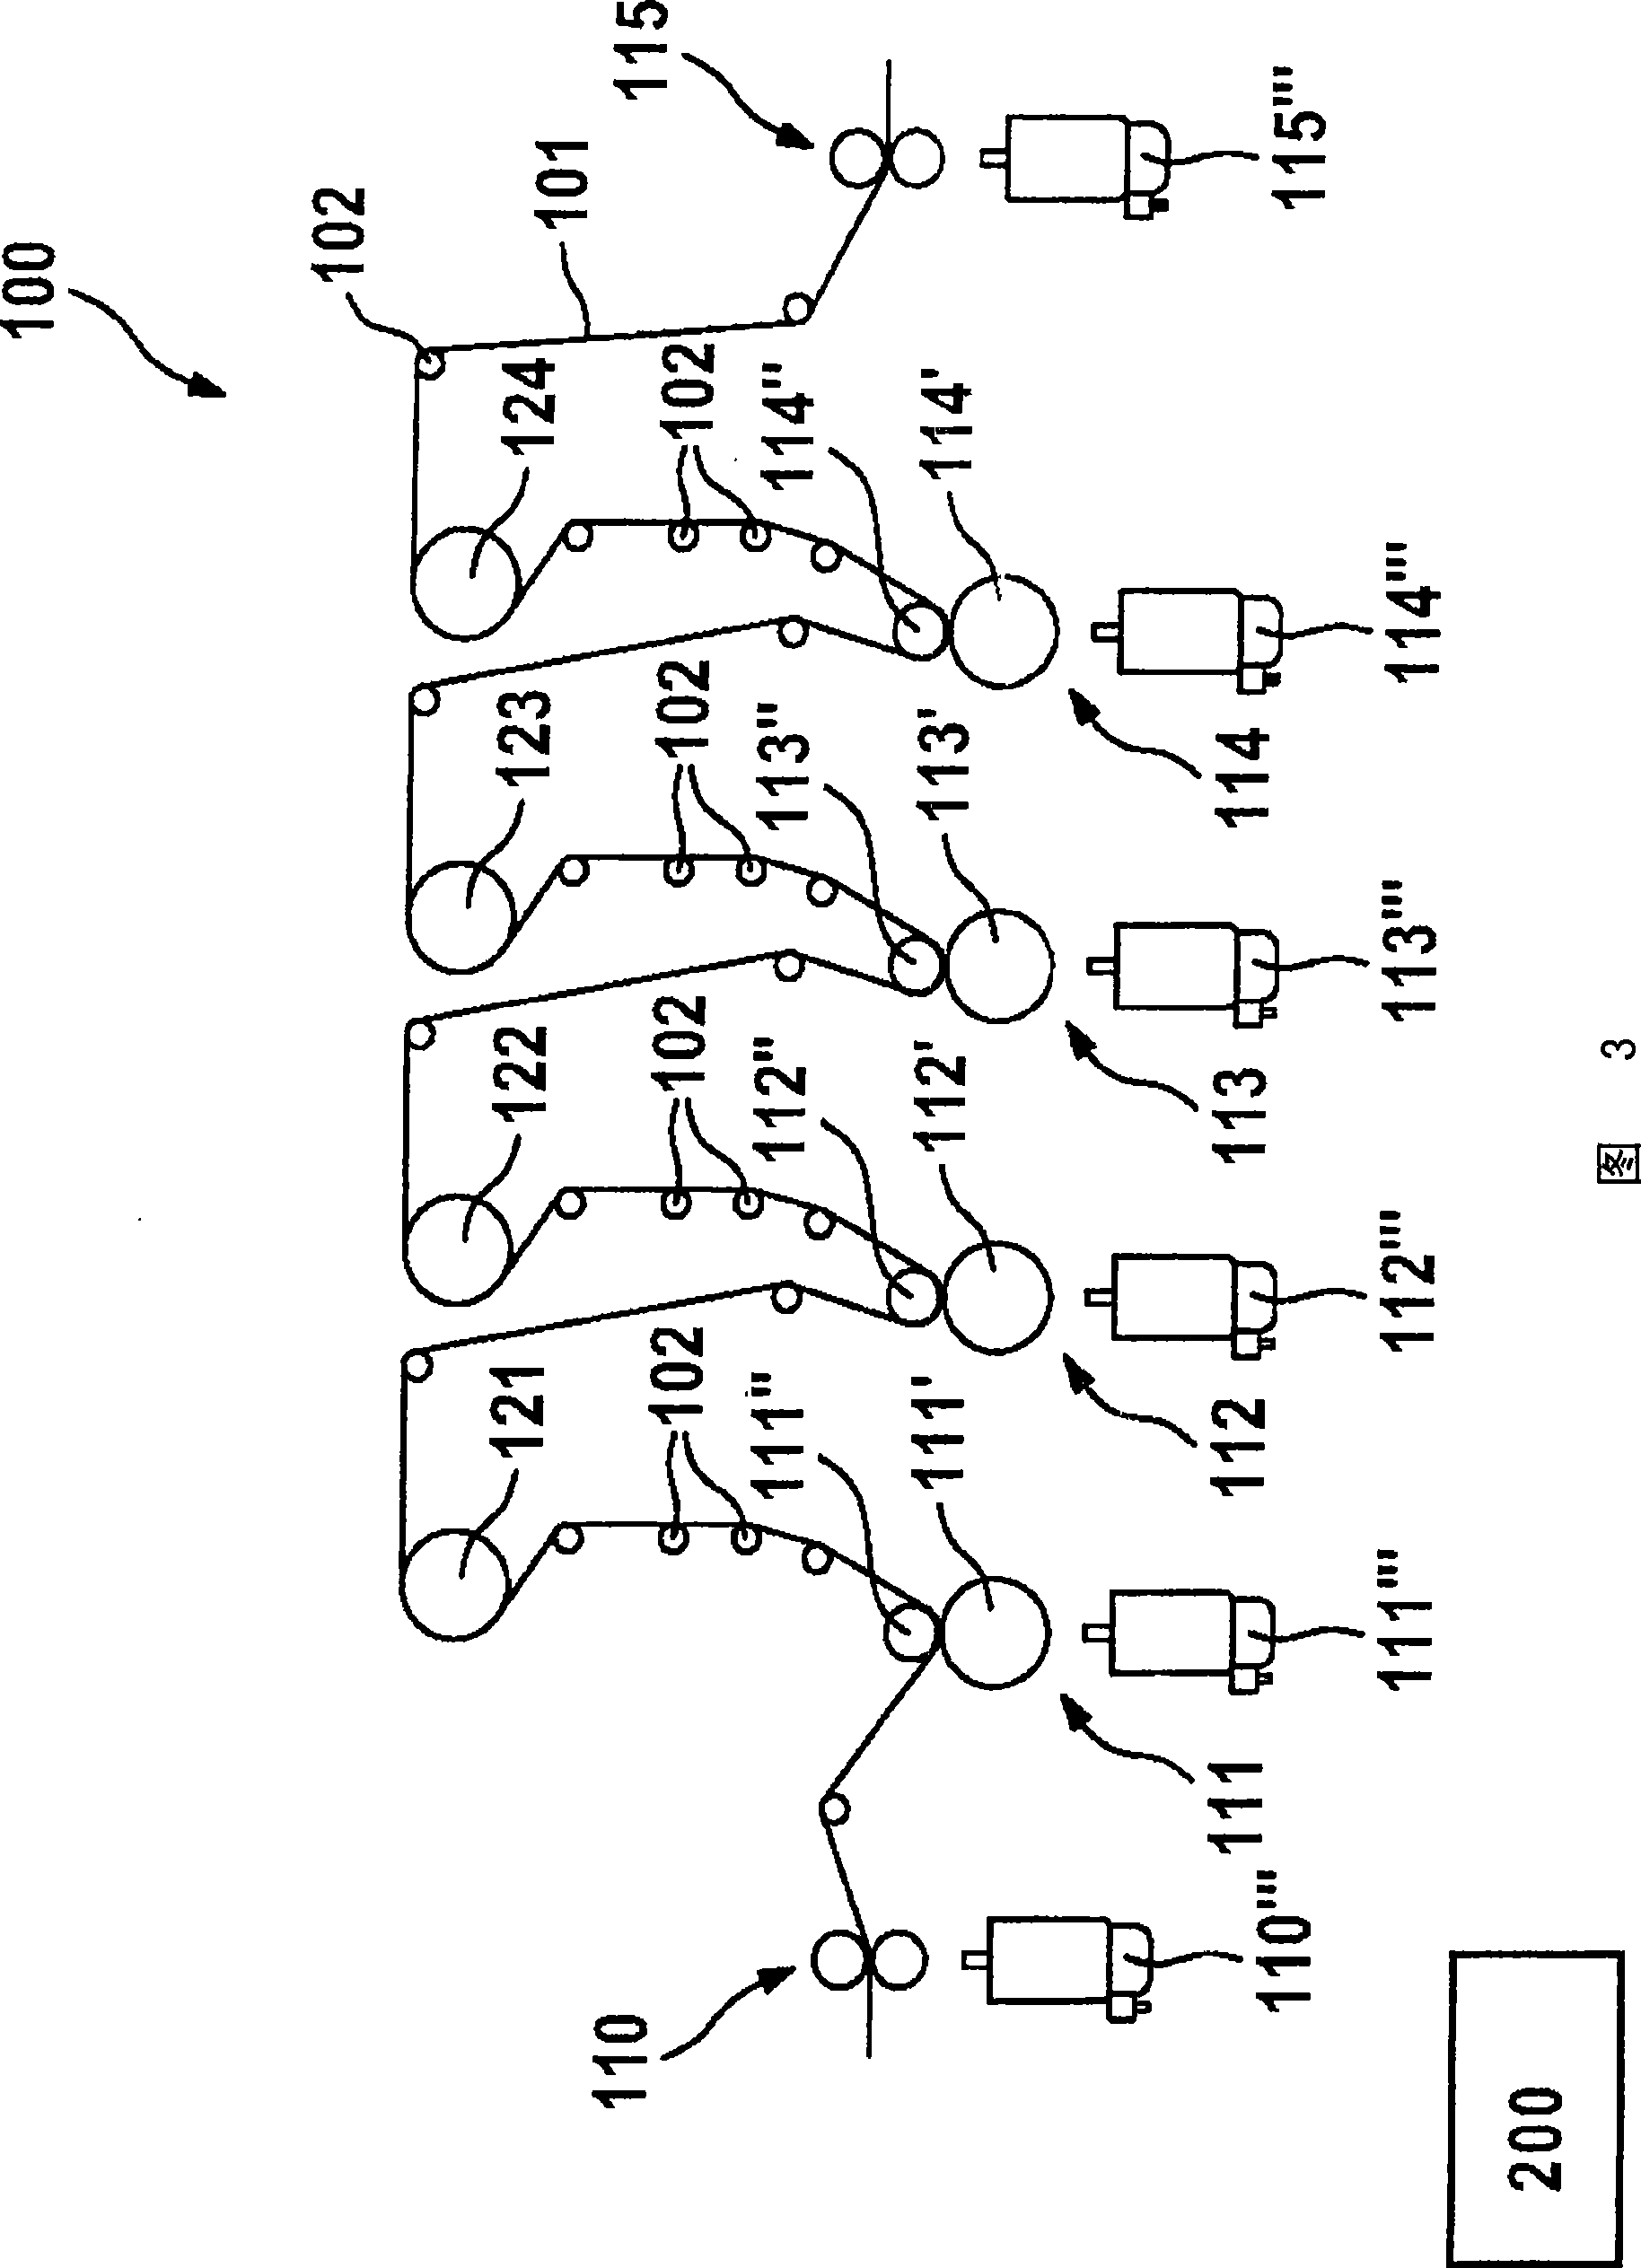 Method for axial correction in a processing machine, as well as a processing machine